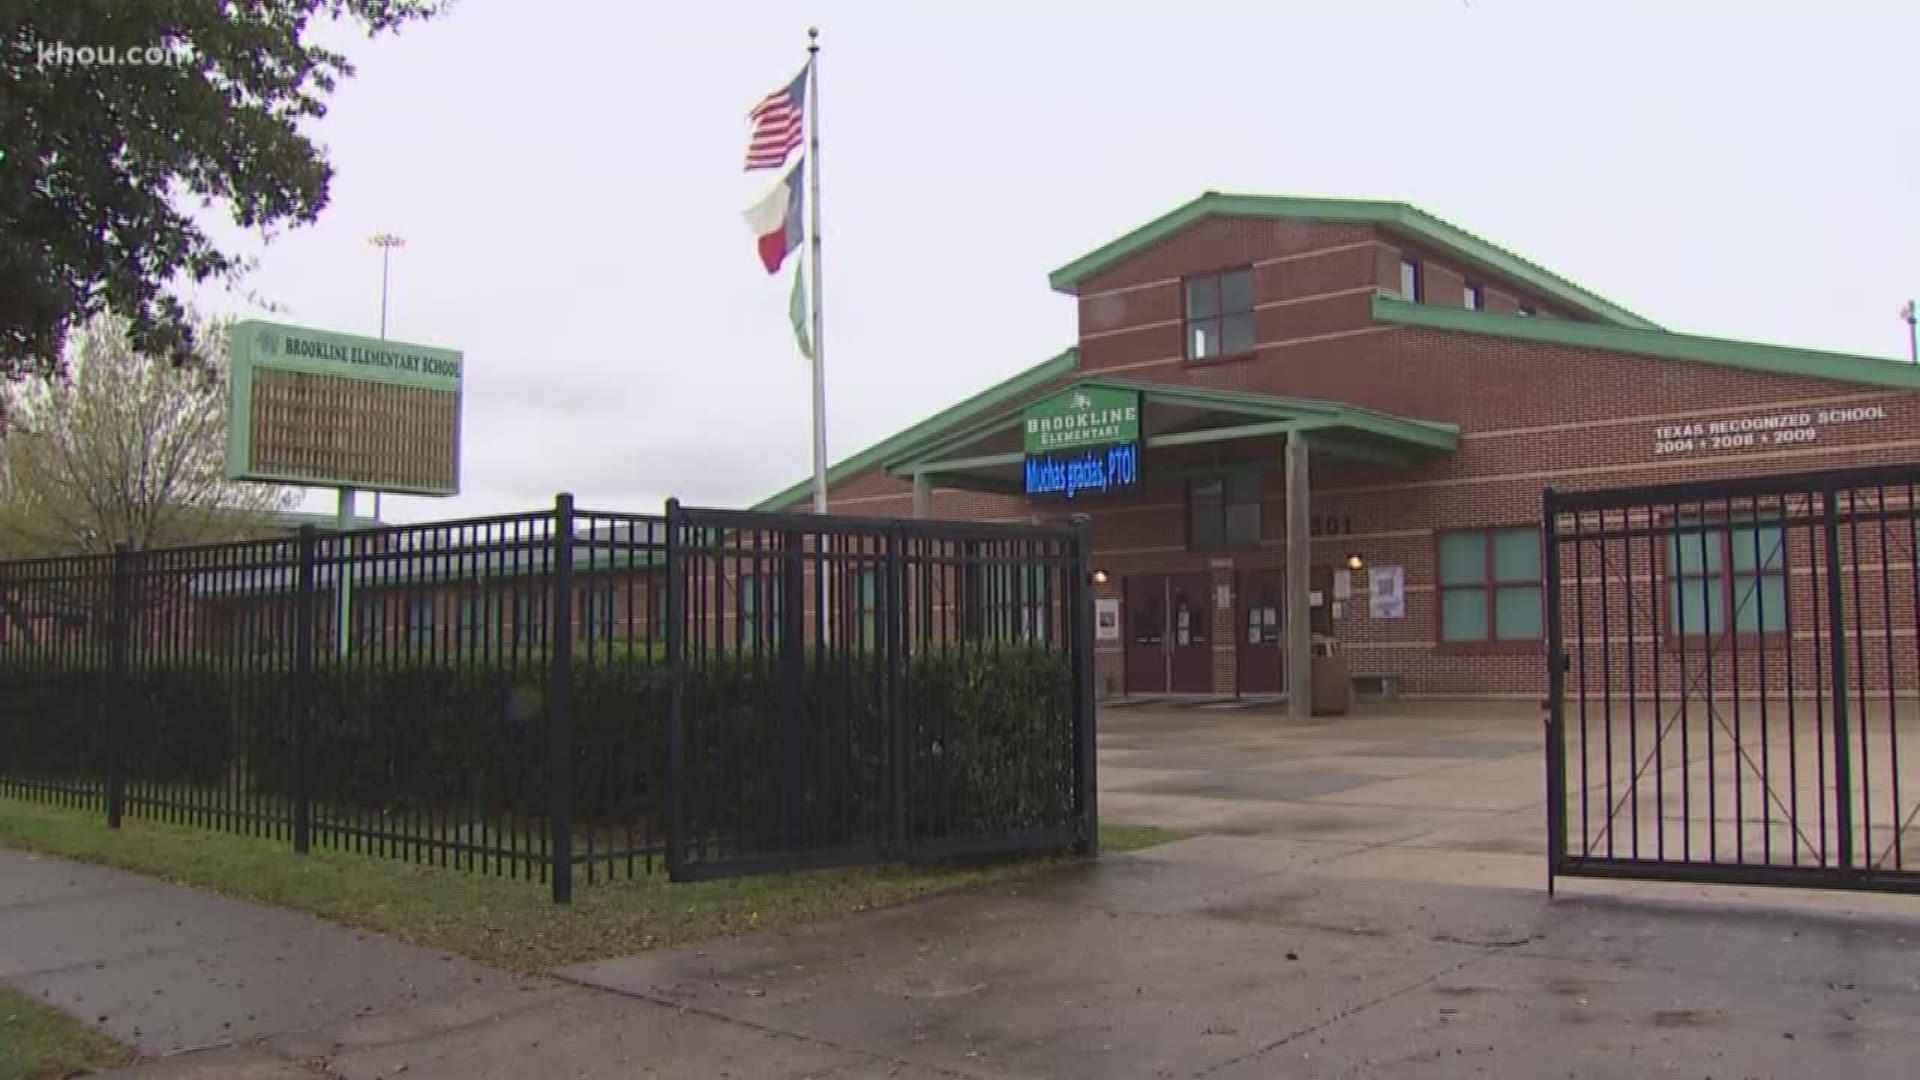 HISD confirms a staff member at Brookline Elementary was removed from campus after allegations arose.